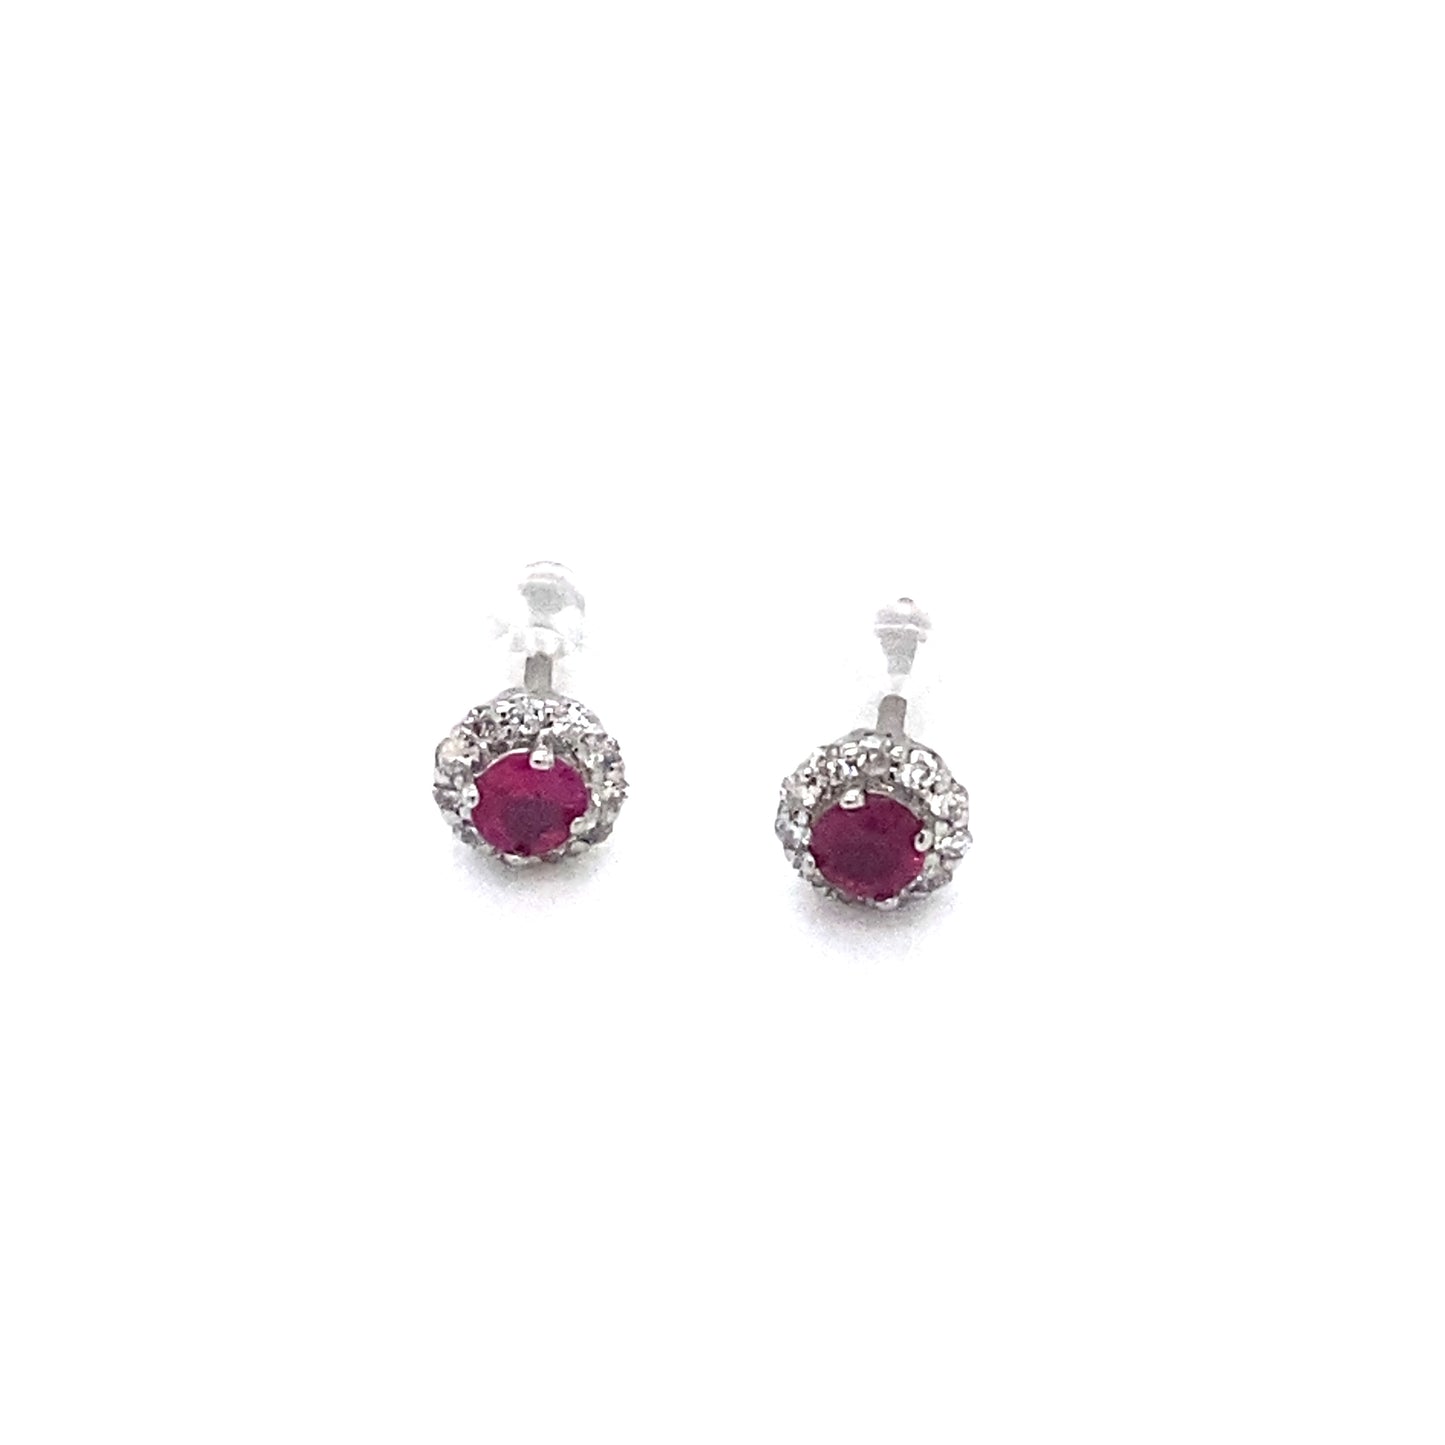 Circa 1990s 0.18ctw Ruby and Diamond Stud Earrings in Platinum